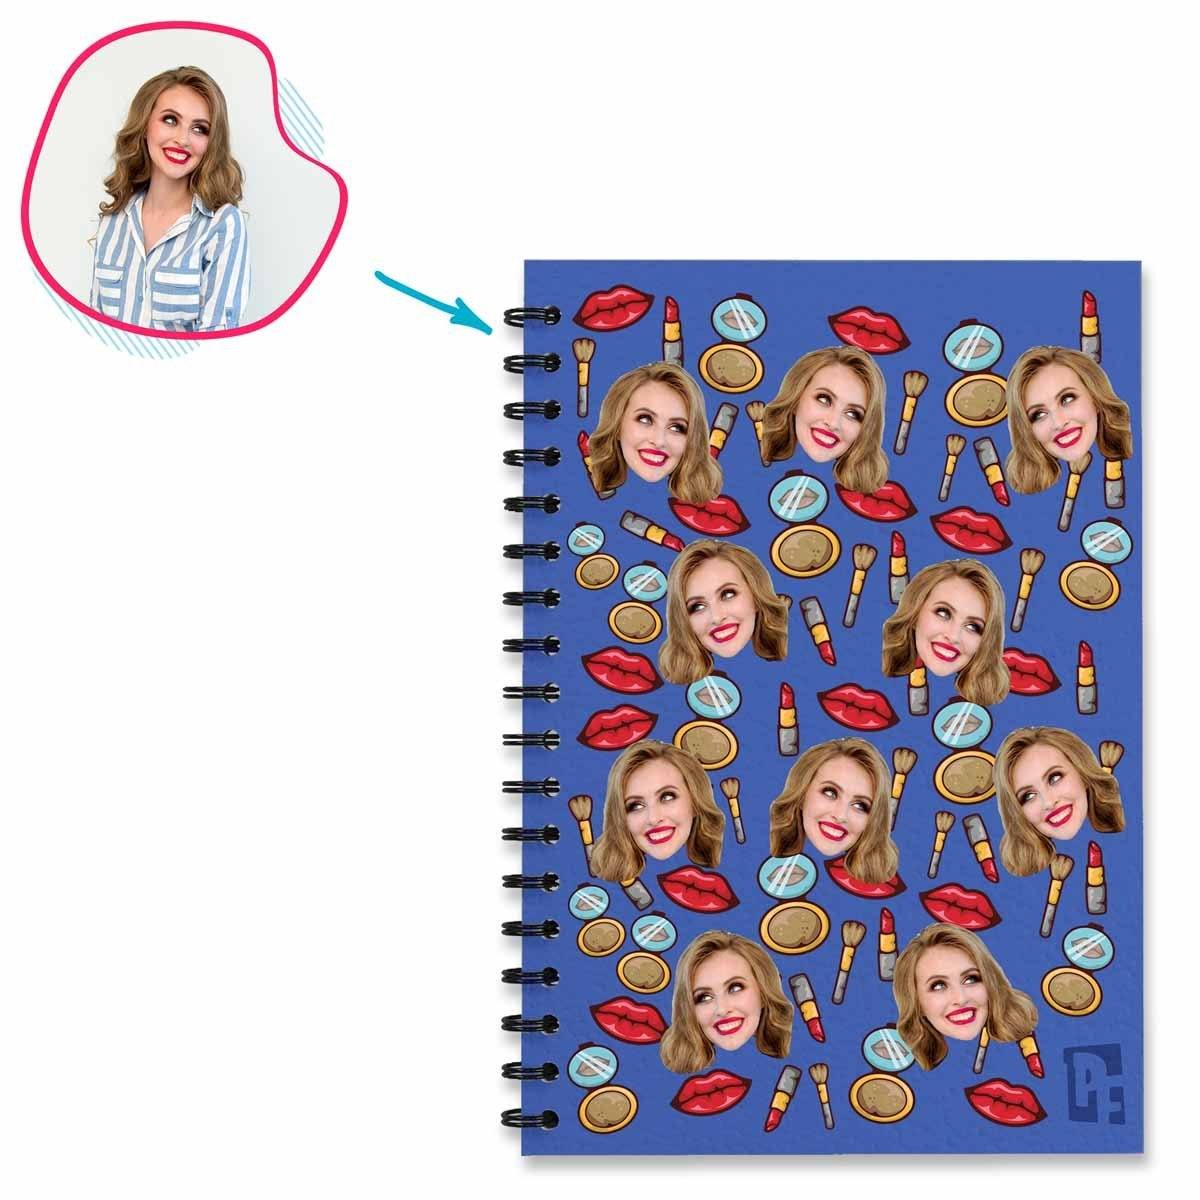 Darkblue Auntie personalized notebook with photo of face printed on them